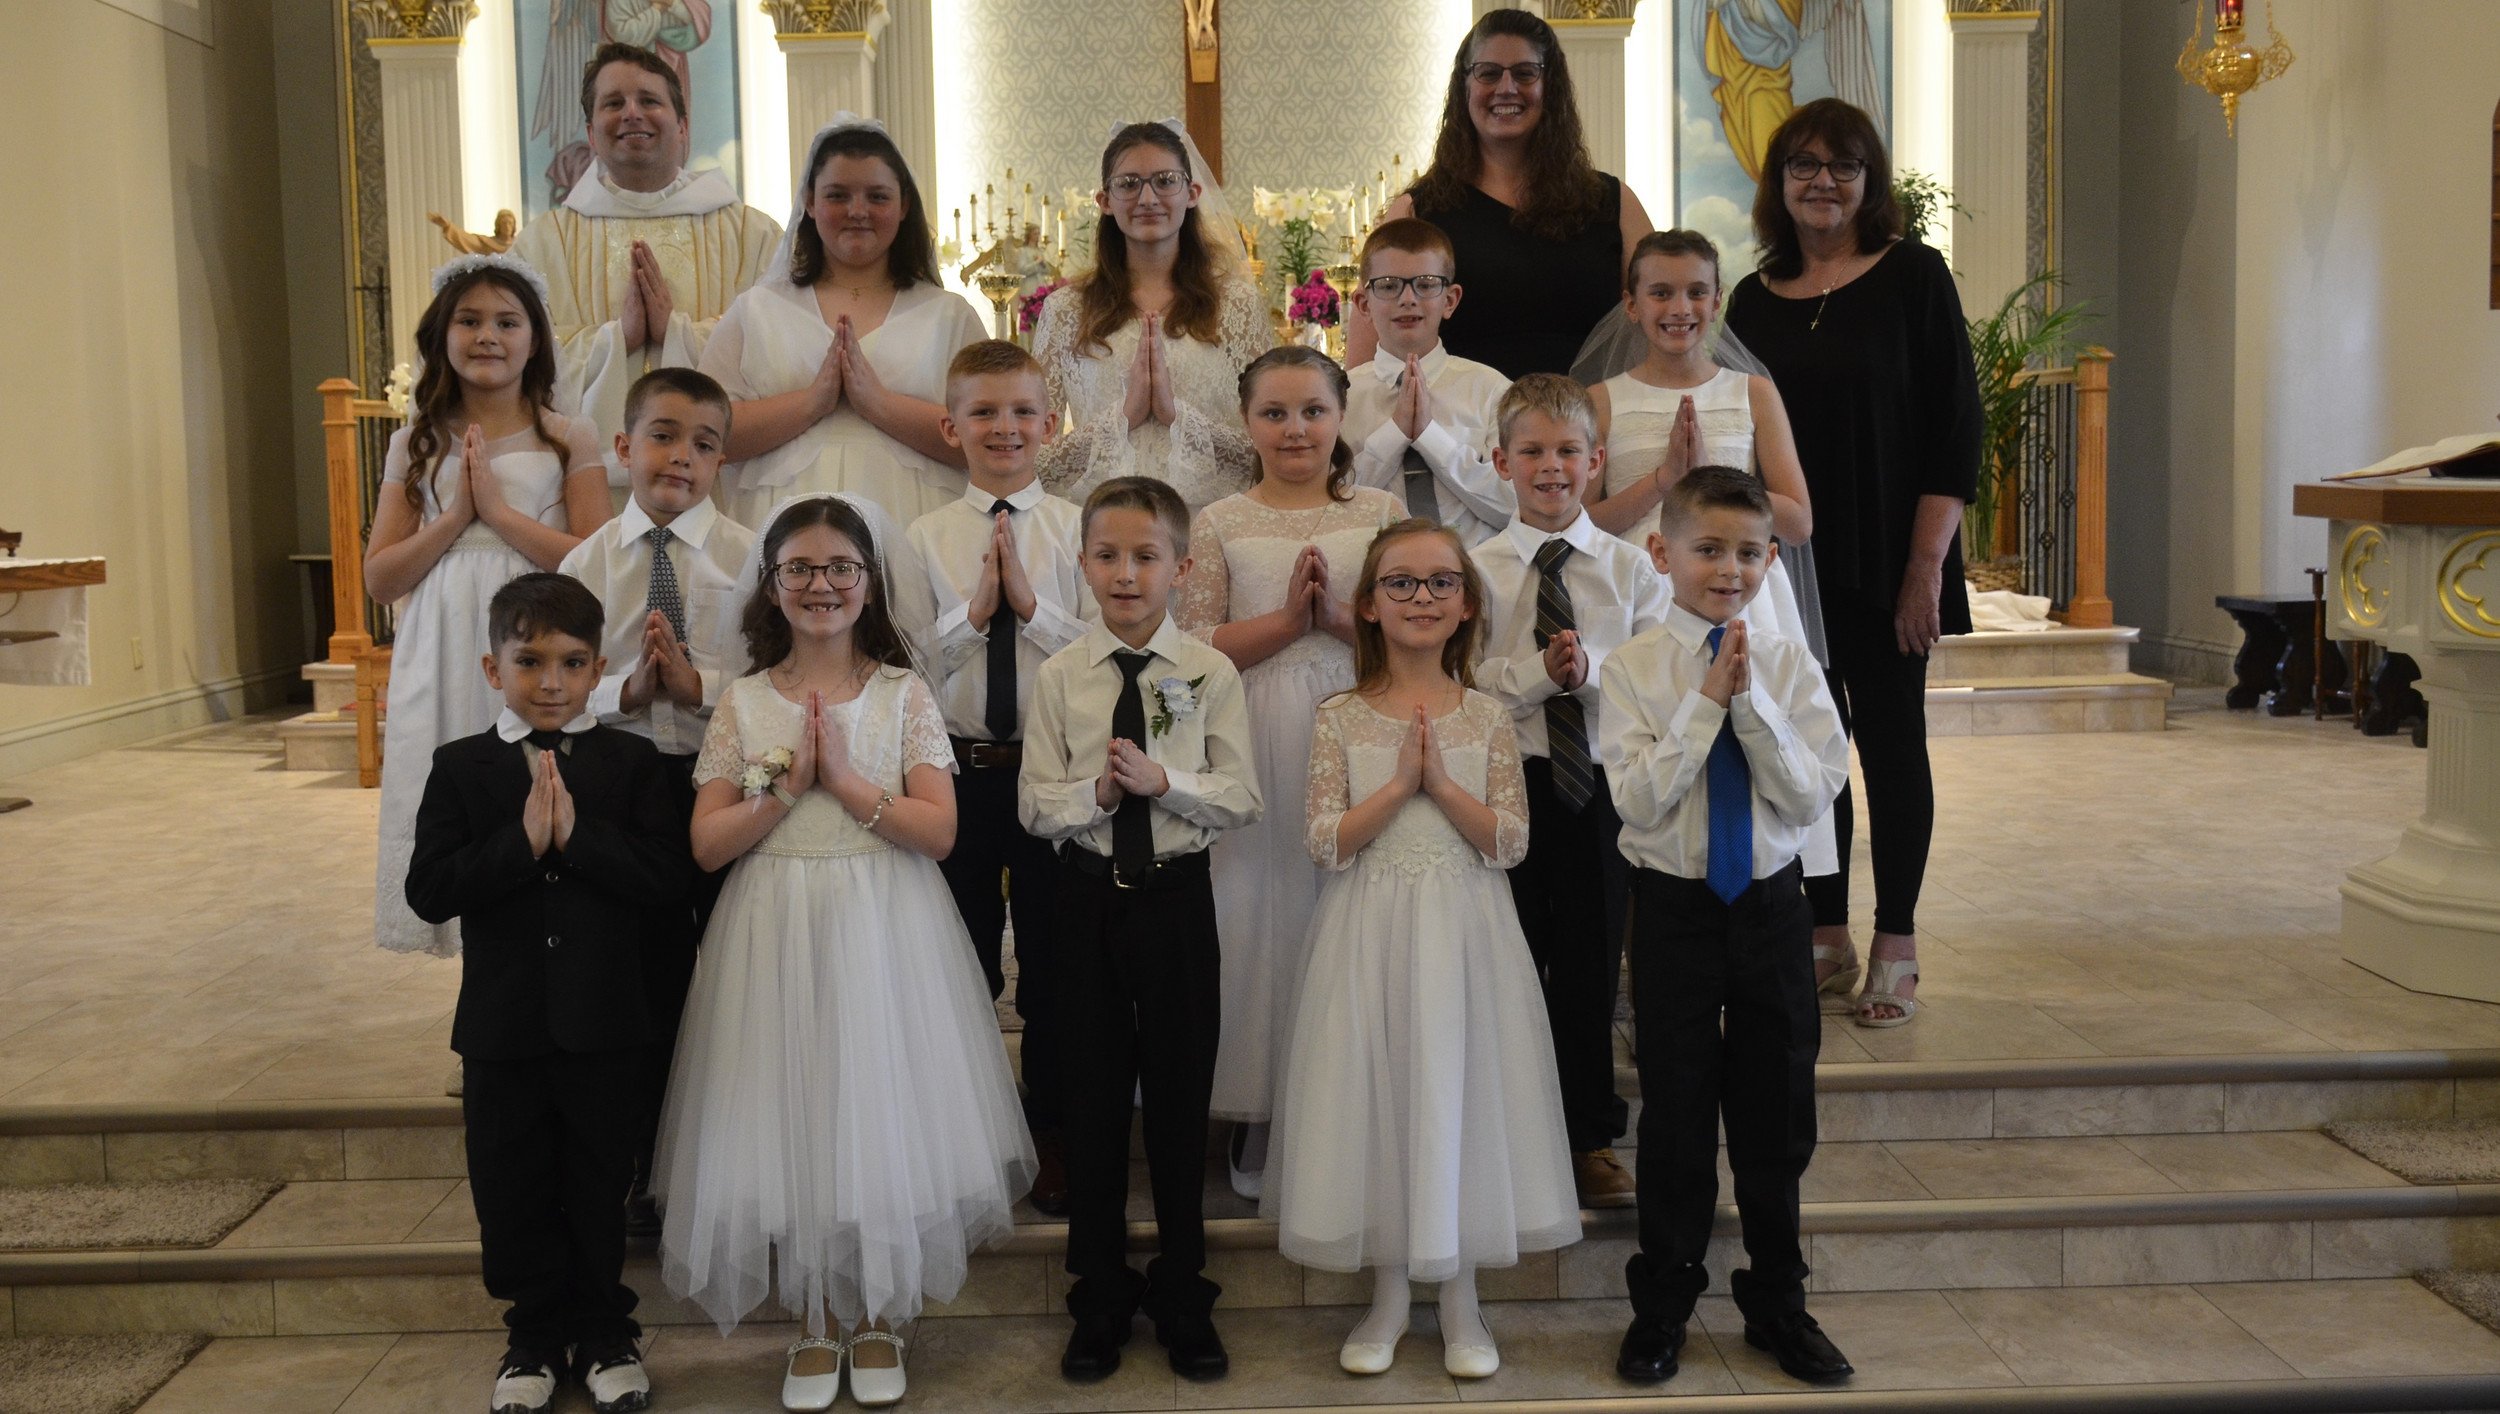 First Communion at St. Mary